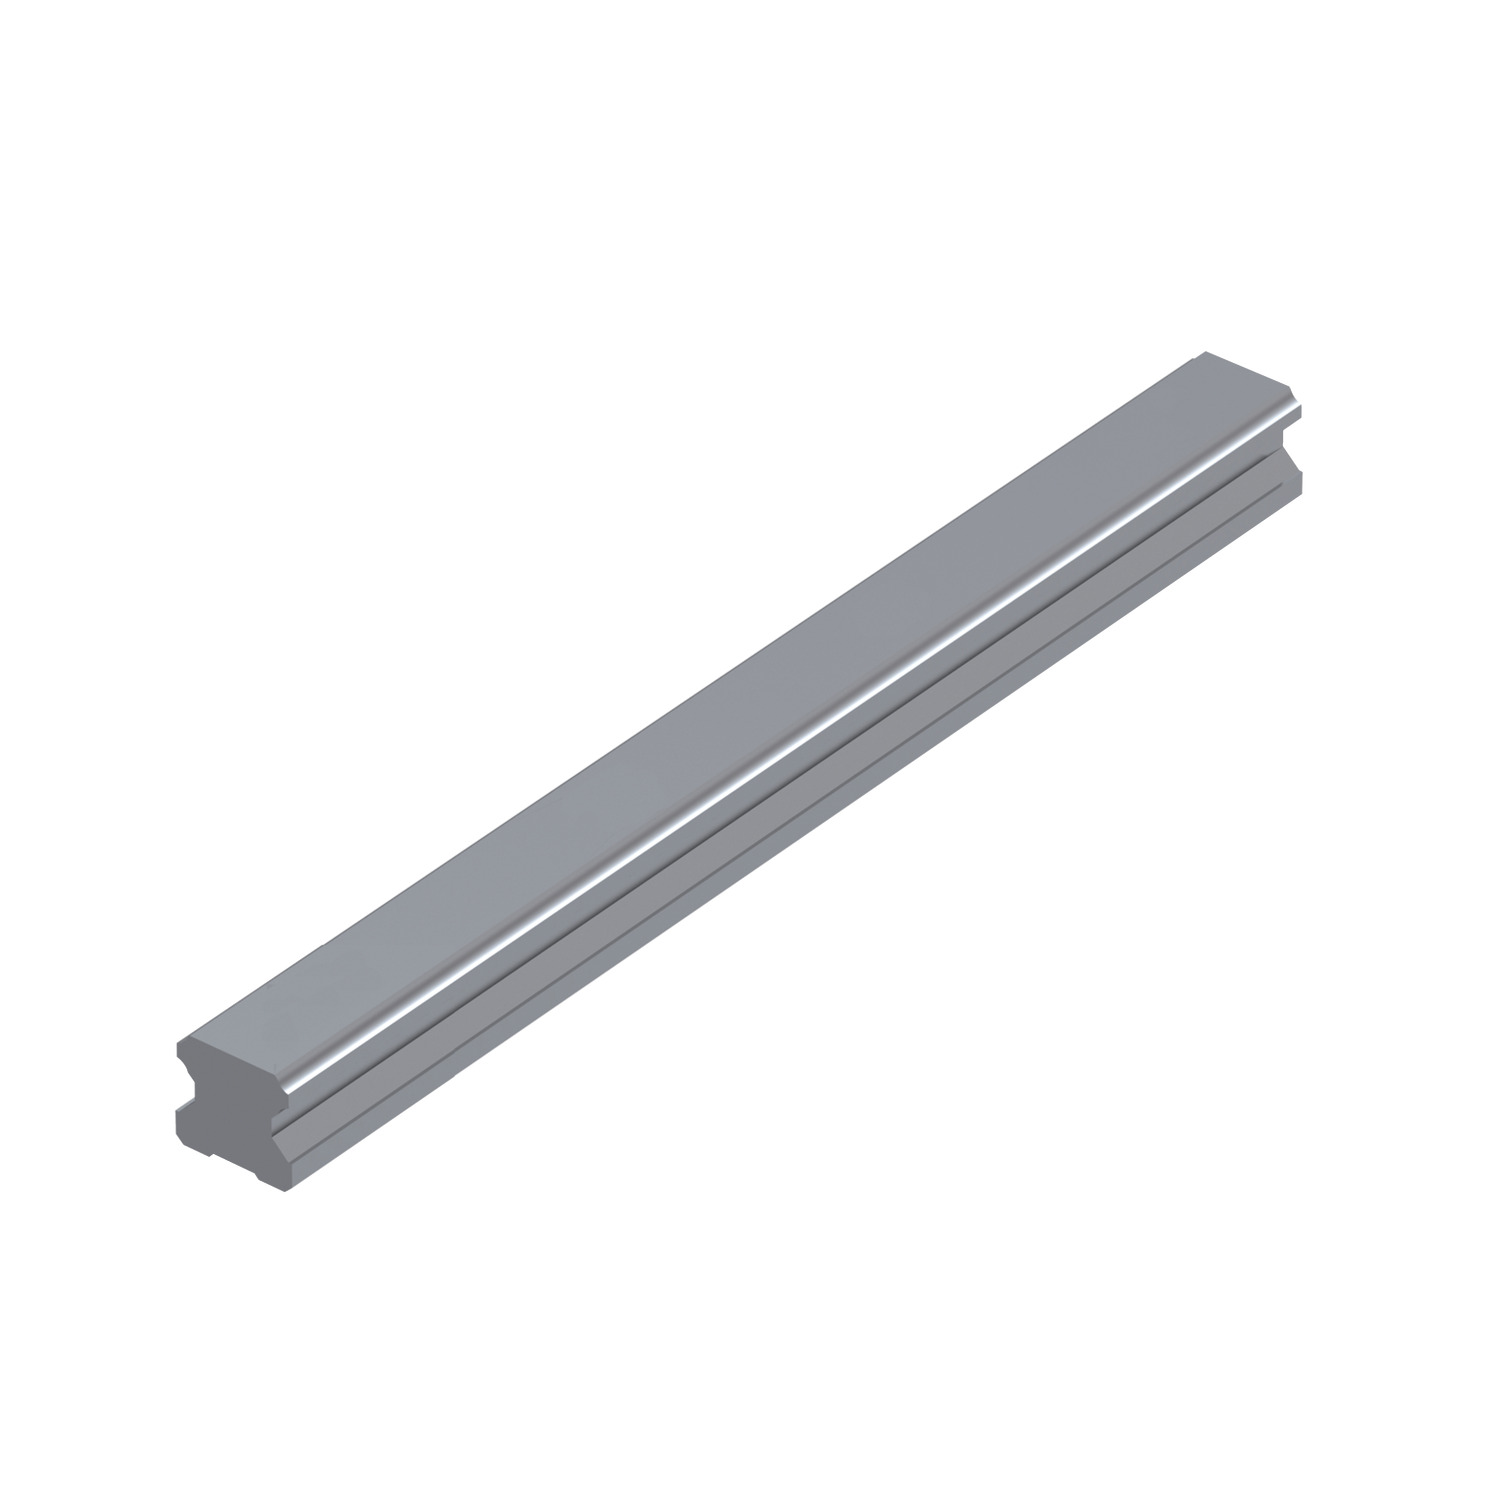 L1016.RF15-0220 Linear guide rail rear fixing 15mm 0220 Hardened and ground steel. EC:20166038 WG:05063055294683